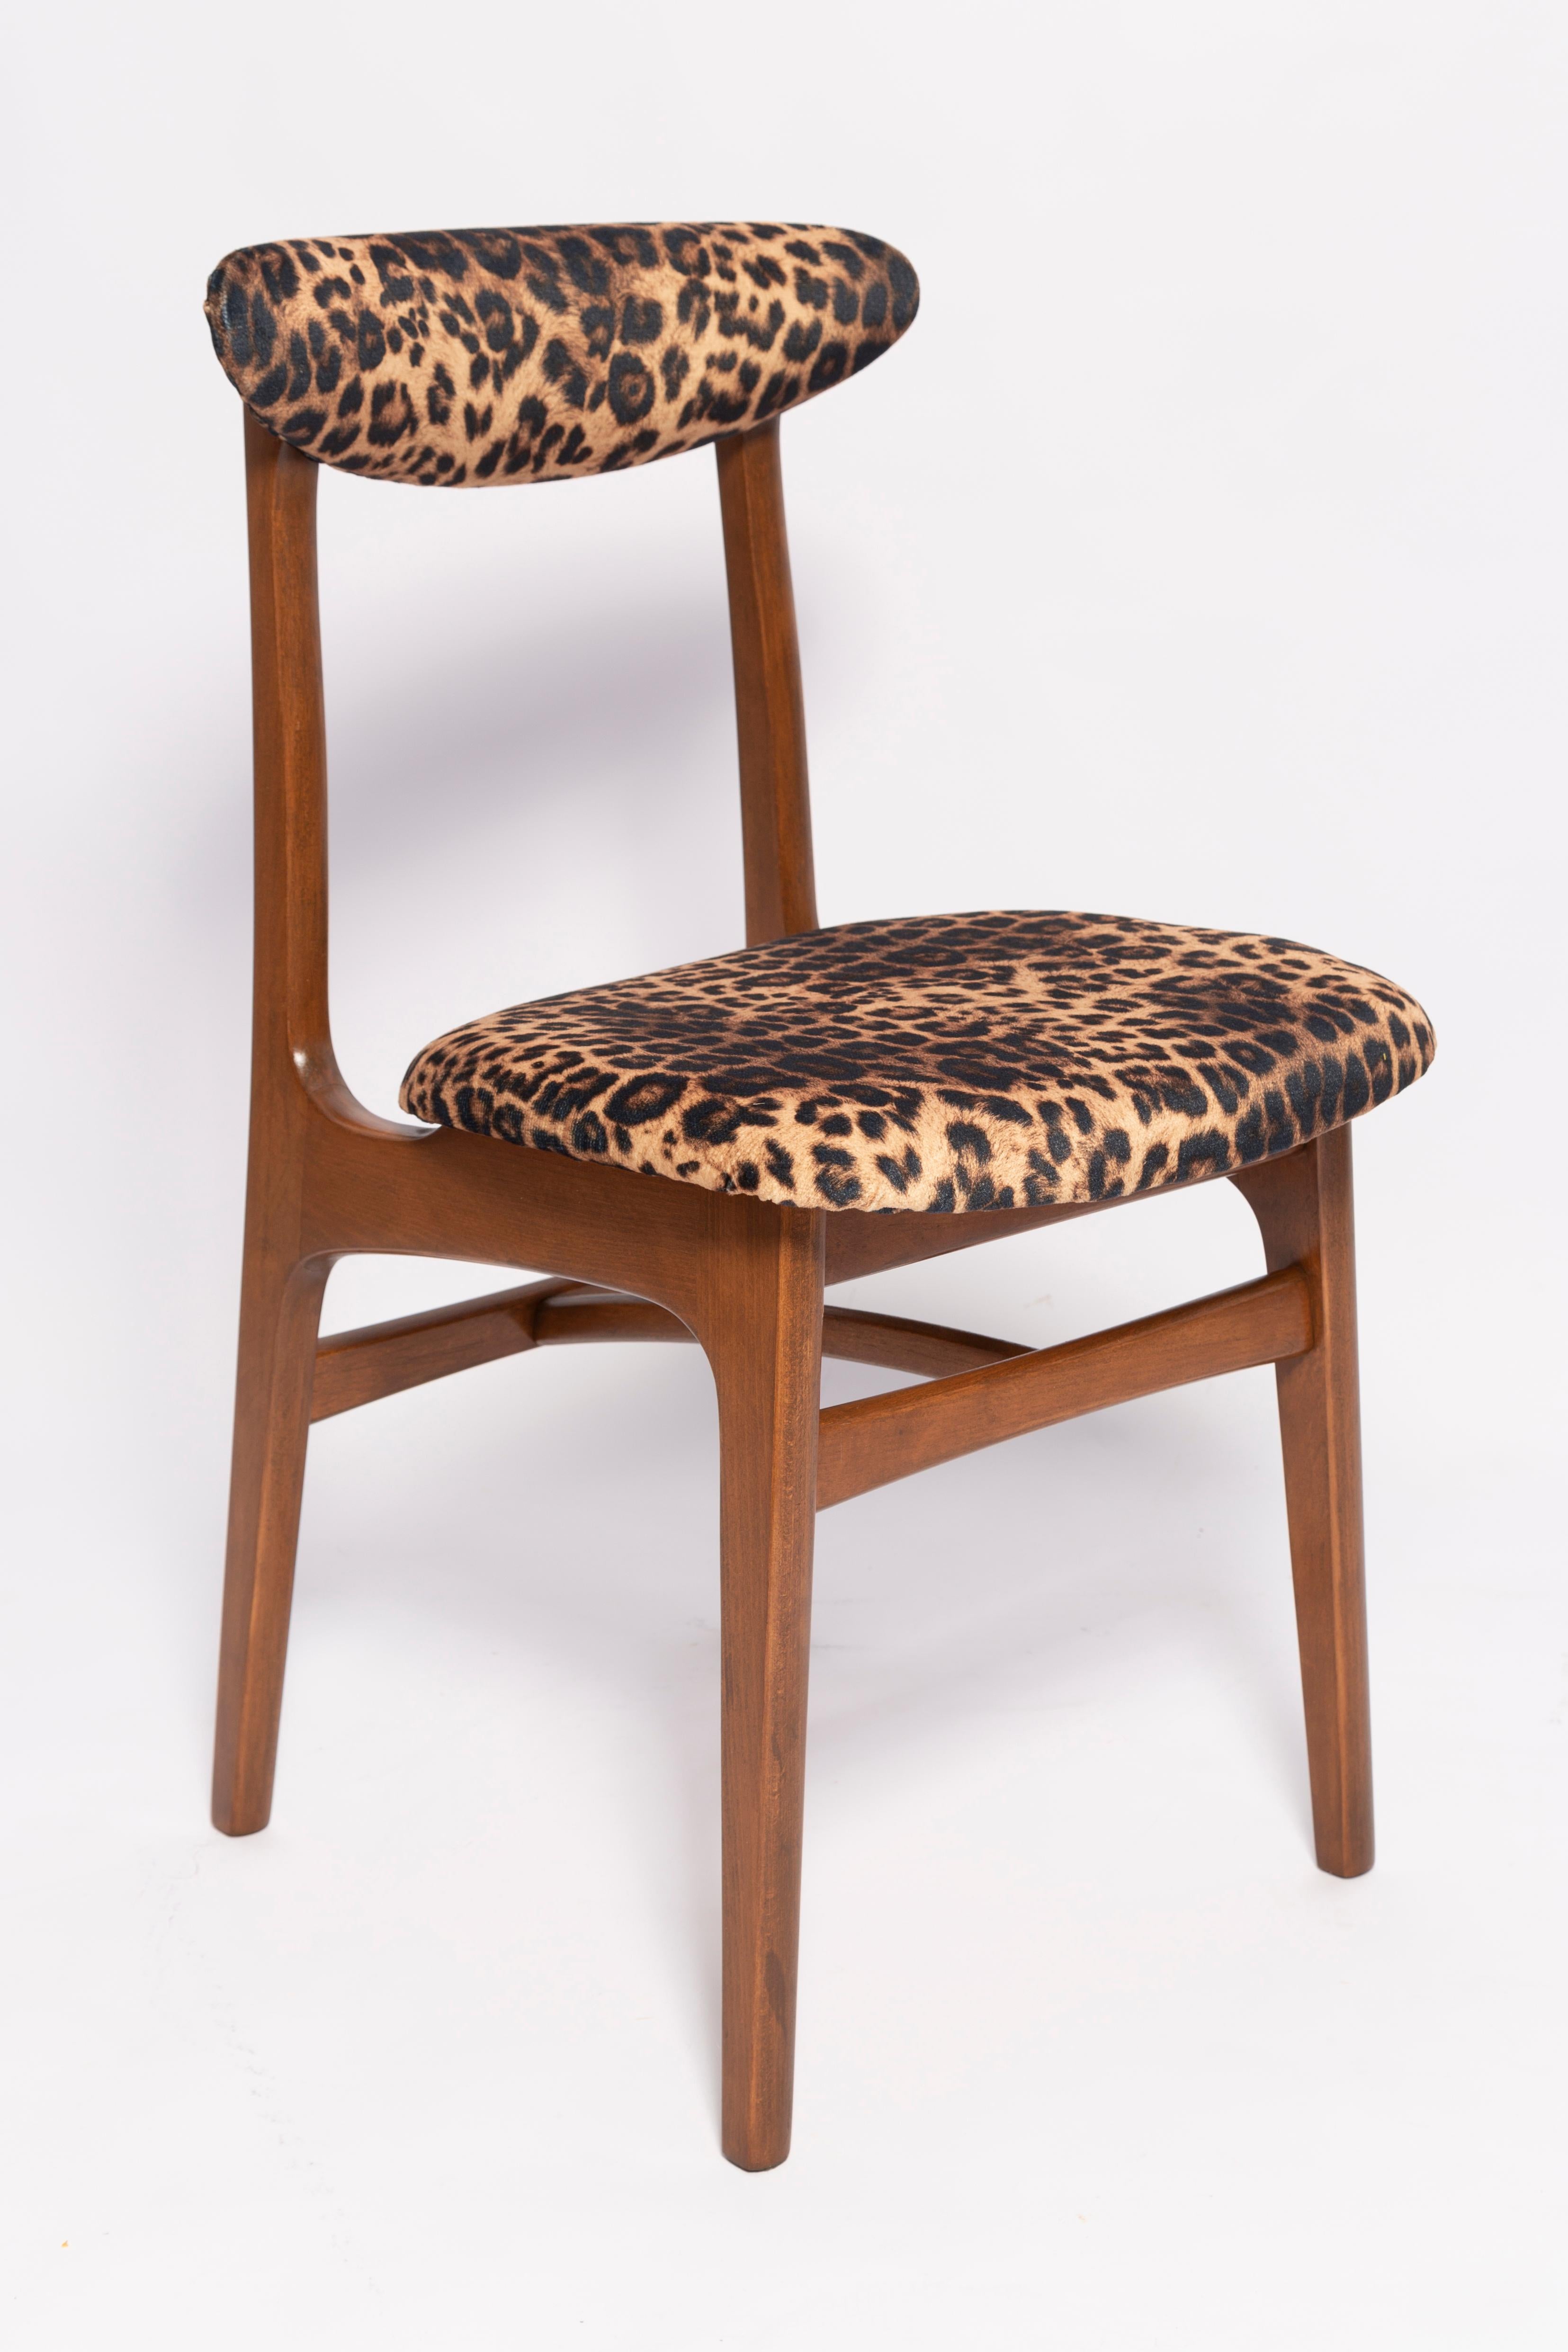 Chair designed by Prof. Rajmund Halas. Made of beechwood. Chair is after a complete upholstery renovation, the woodwork has been refreshed. Seat is dressed in leopard, durable and pleasant to the touch unique velvet fabric. Chair is stable and very